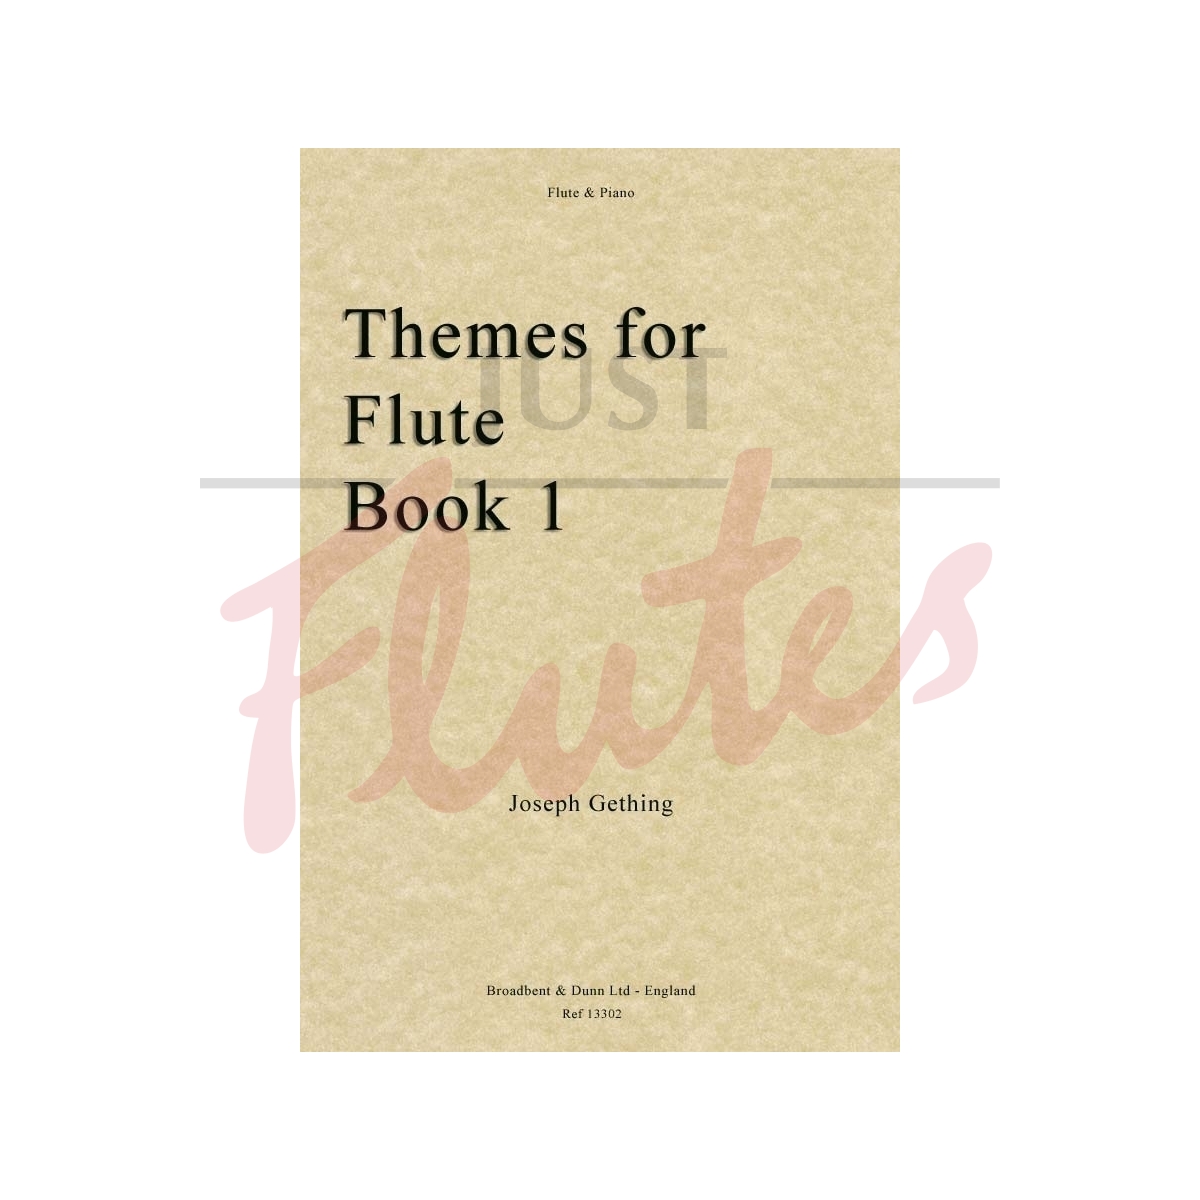 Themes for Flute, Book 1